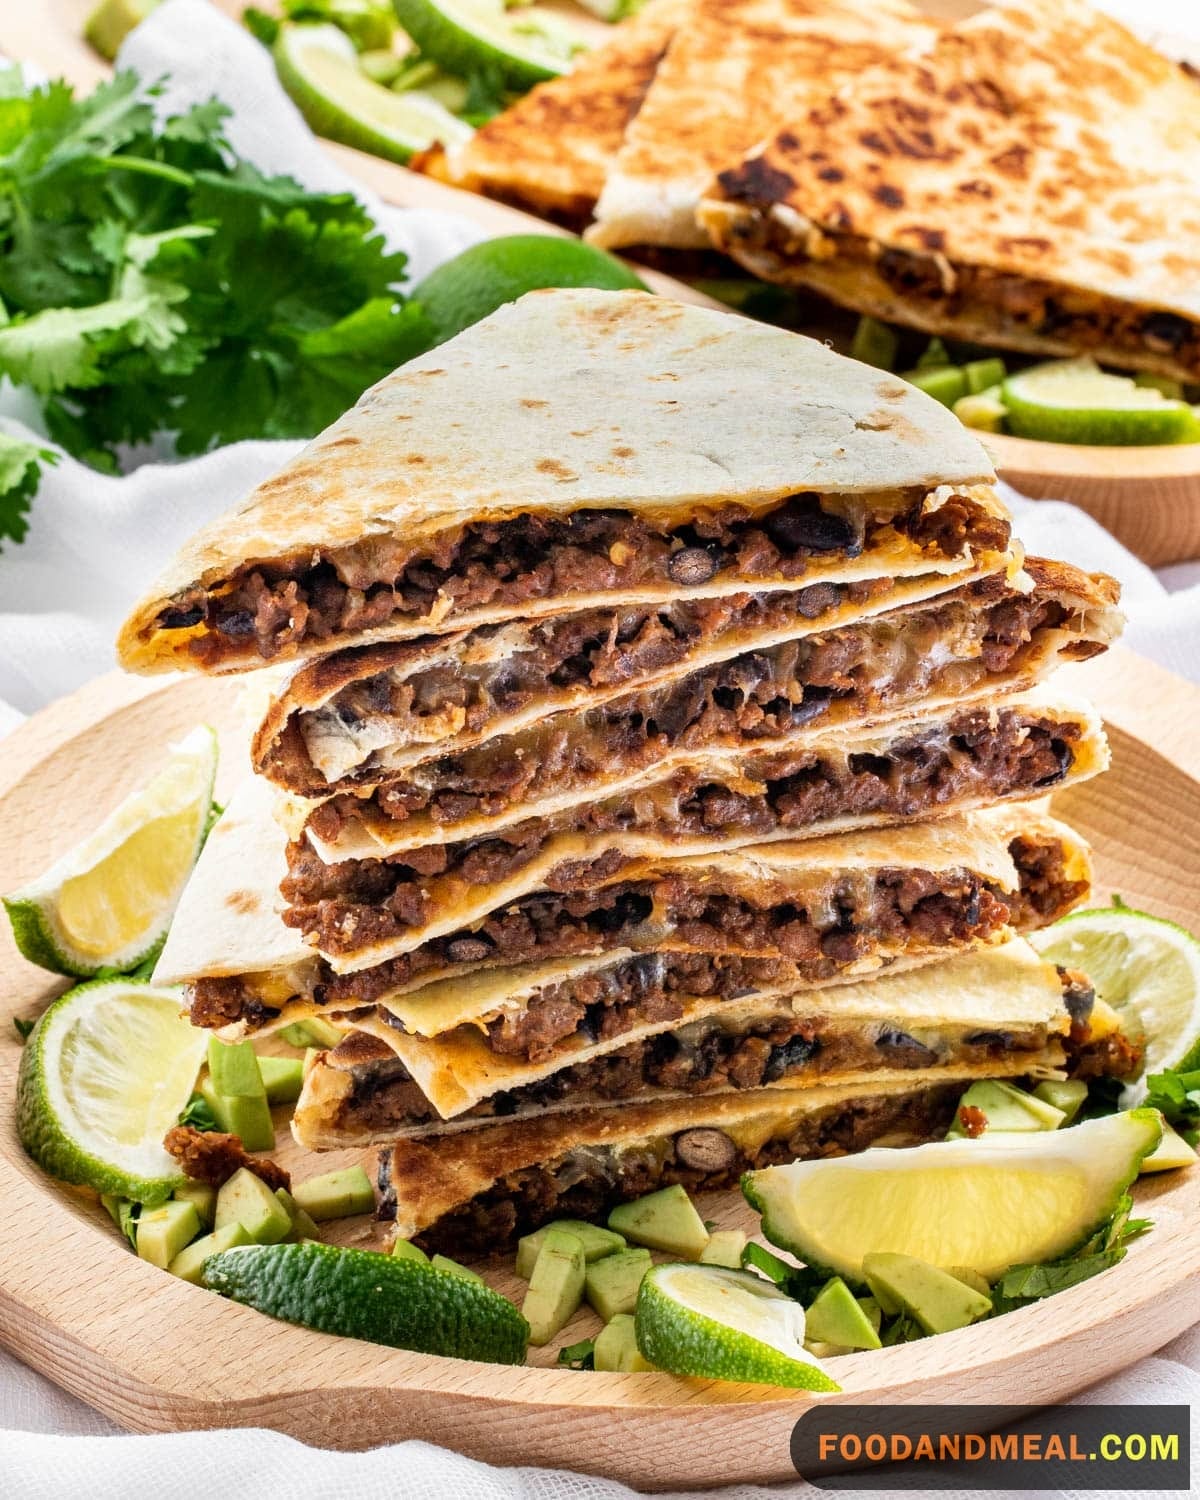 Quesadillas With Beef